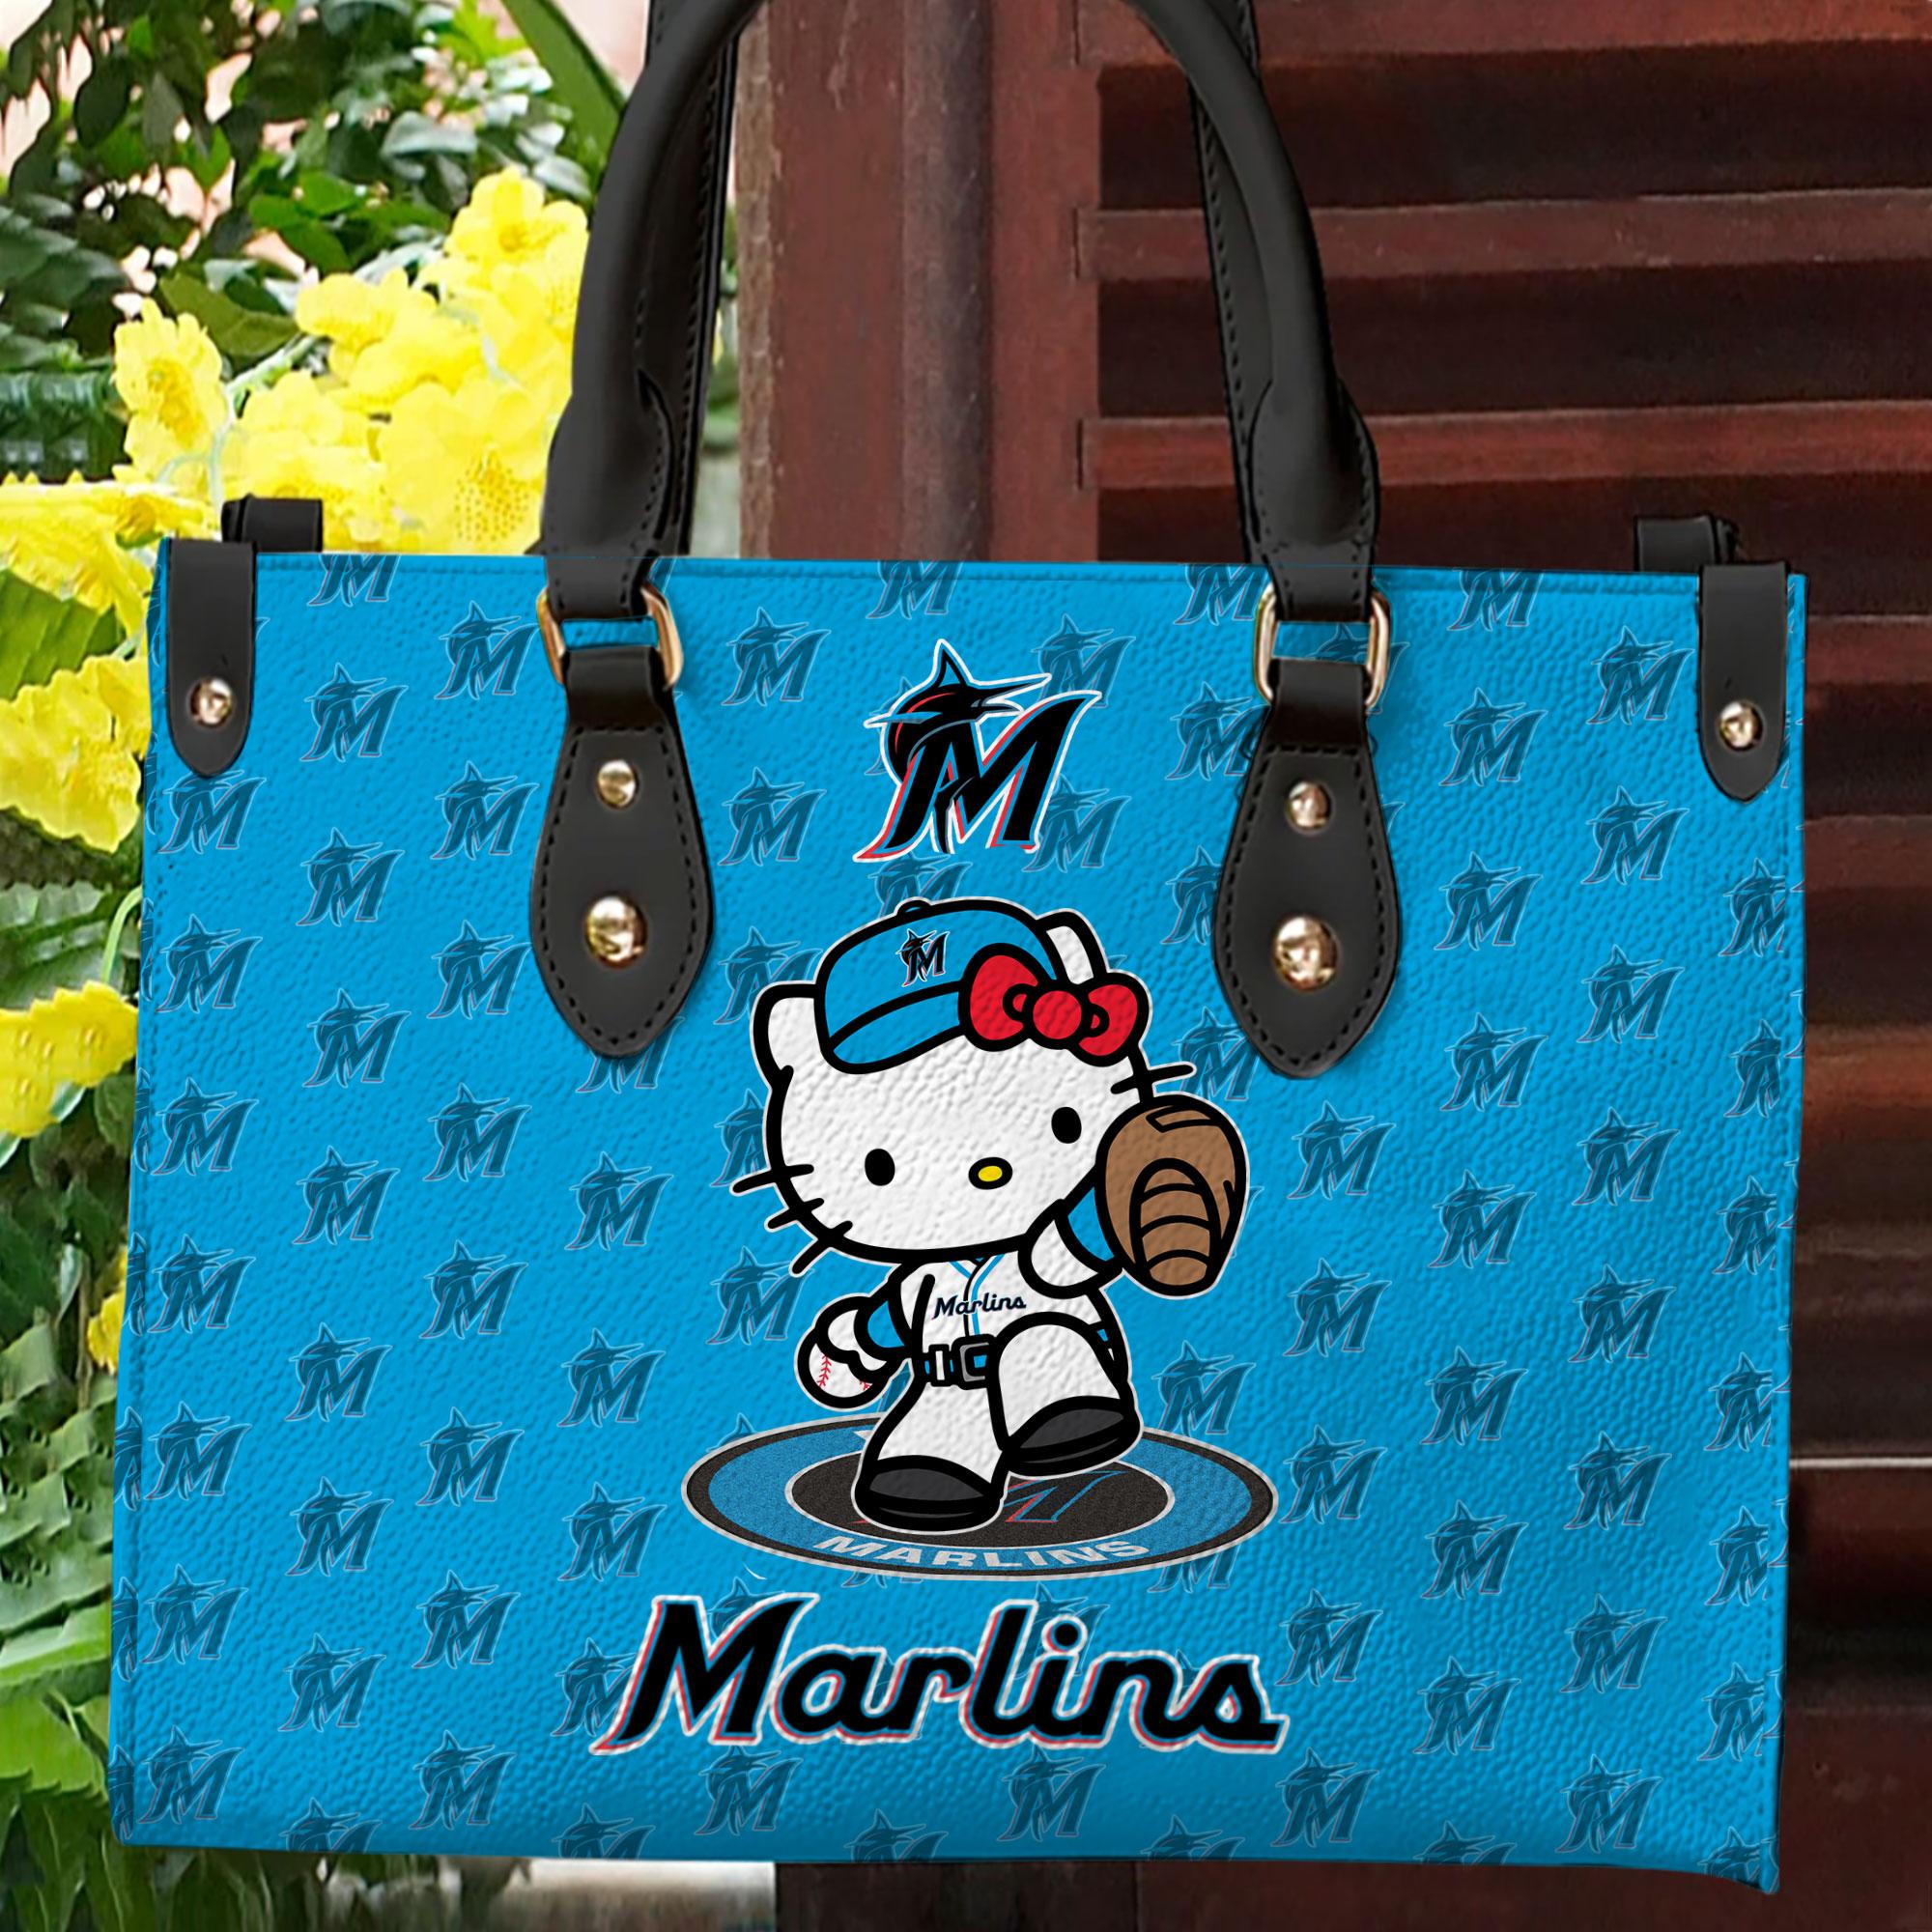 Miami Marlins Kitty Women Leather Hand Bag M1 